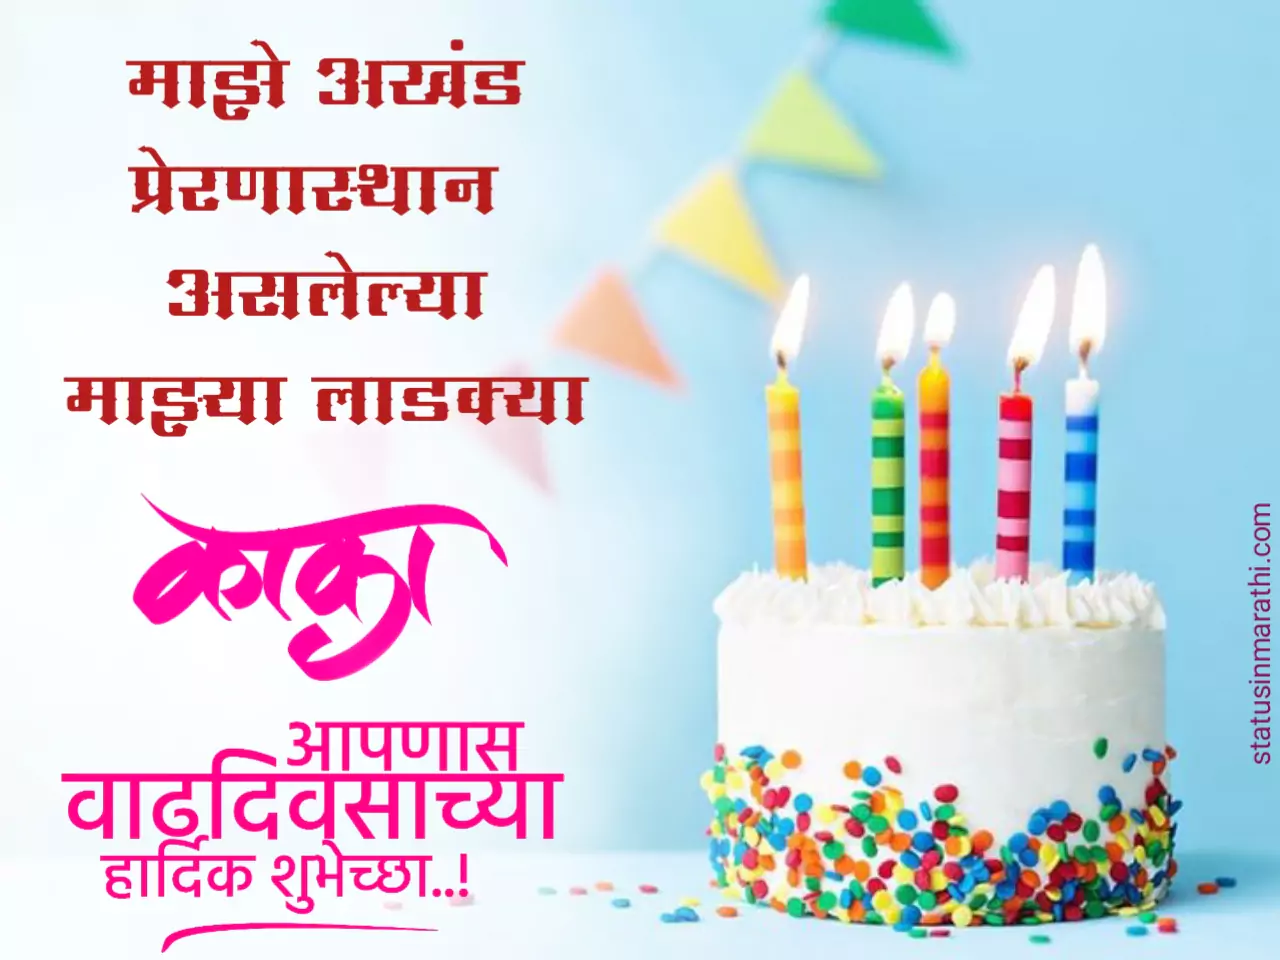 Happy Birthday Image for uncle in marathi